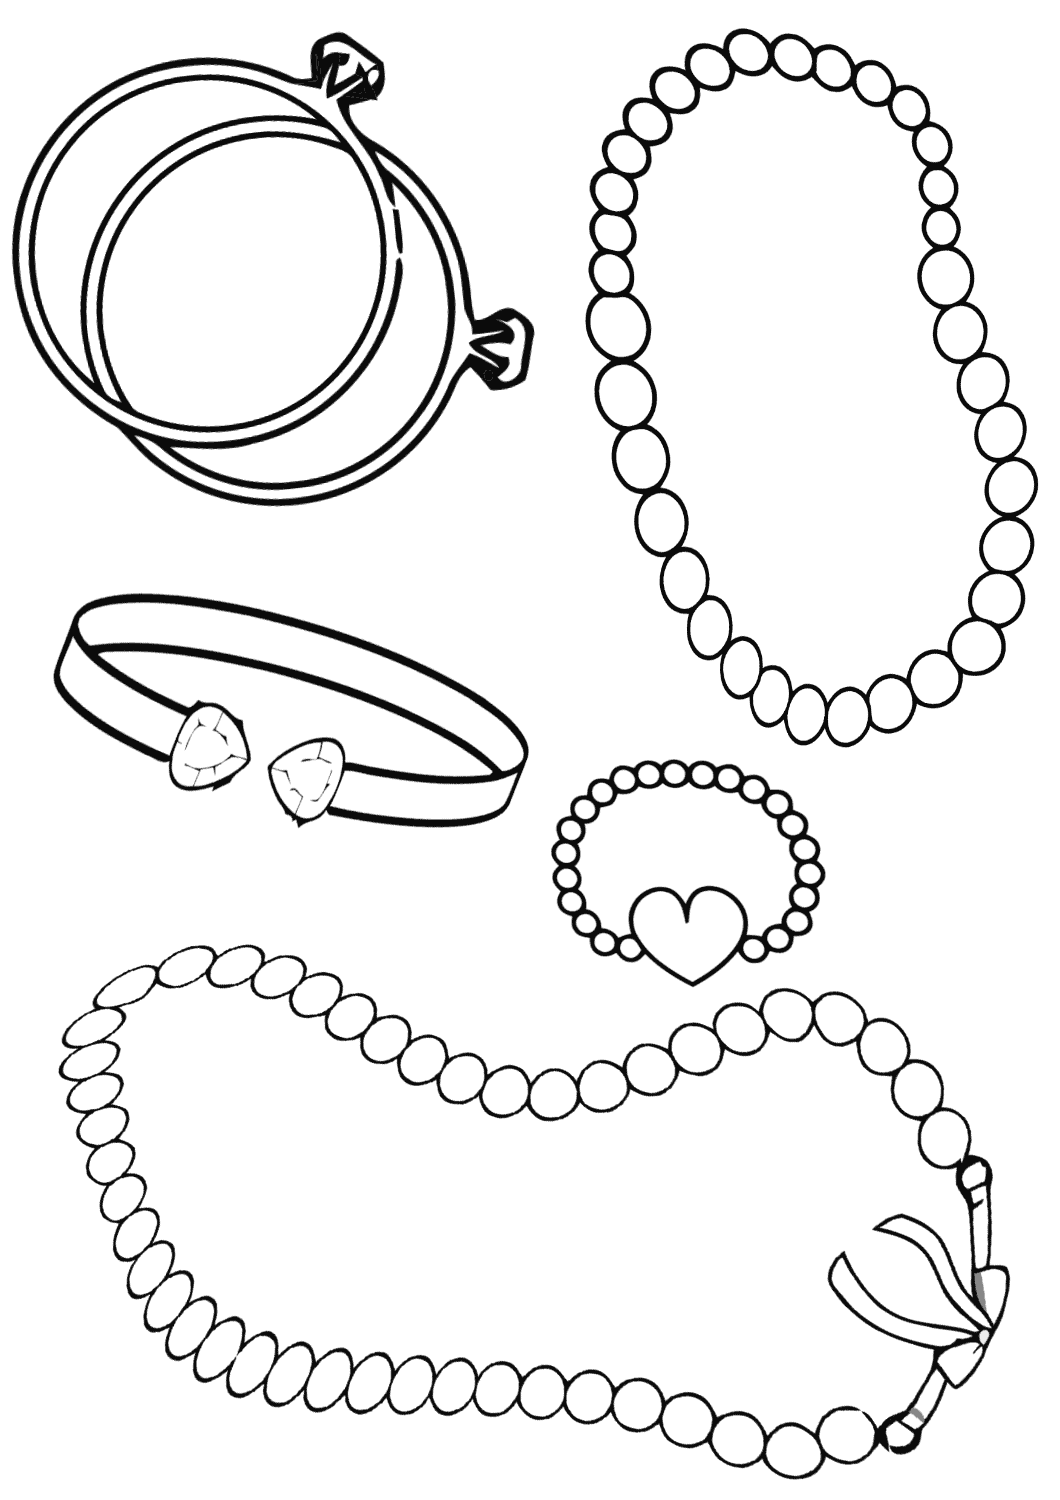 Bracelet Coloring Pages to download and print for free